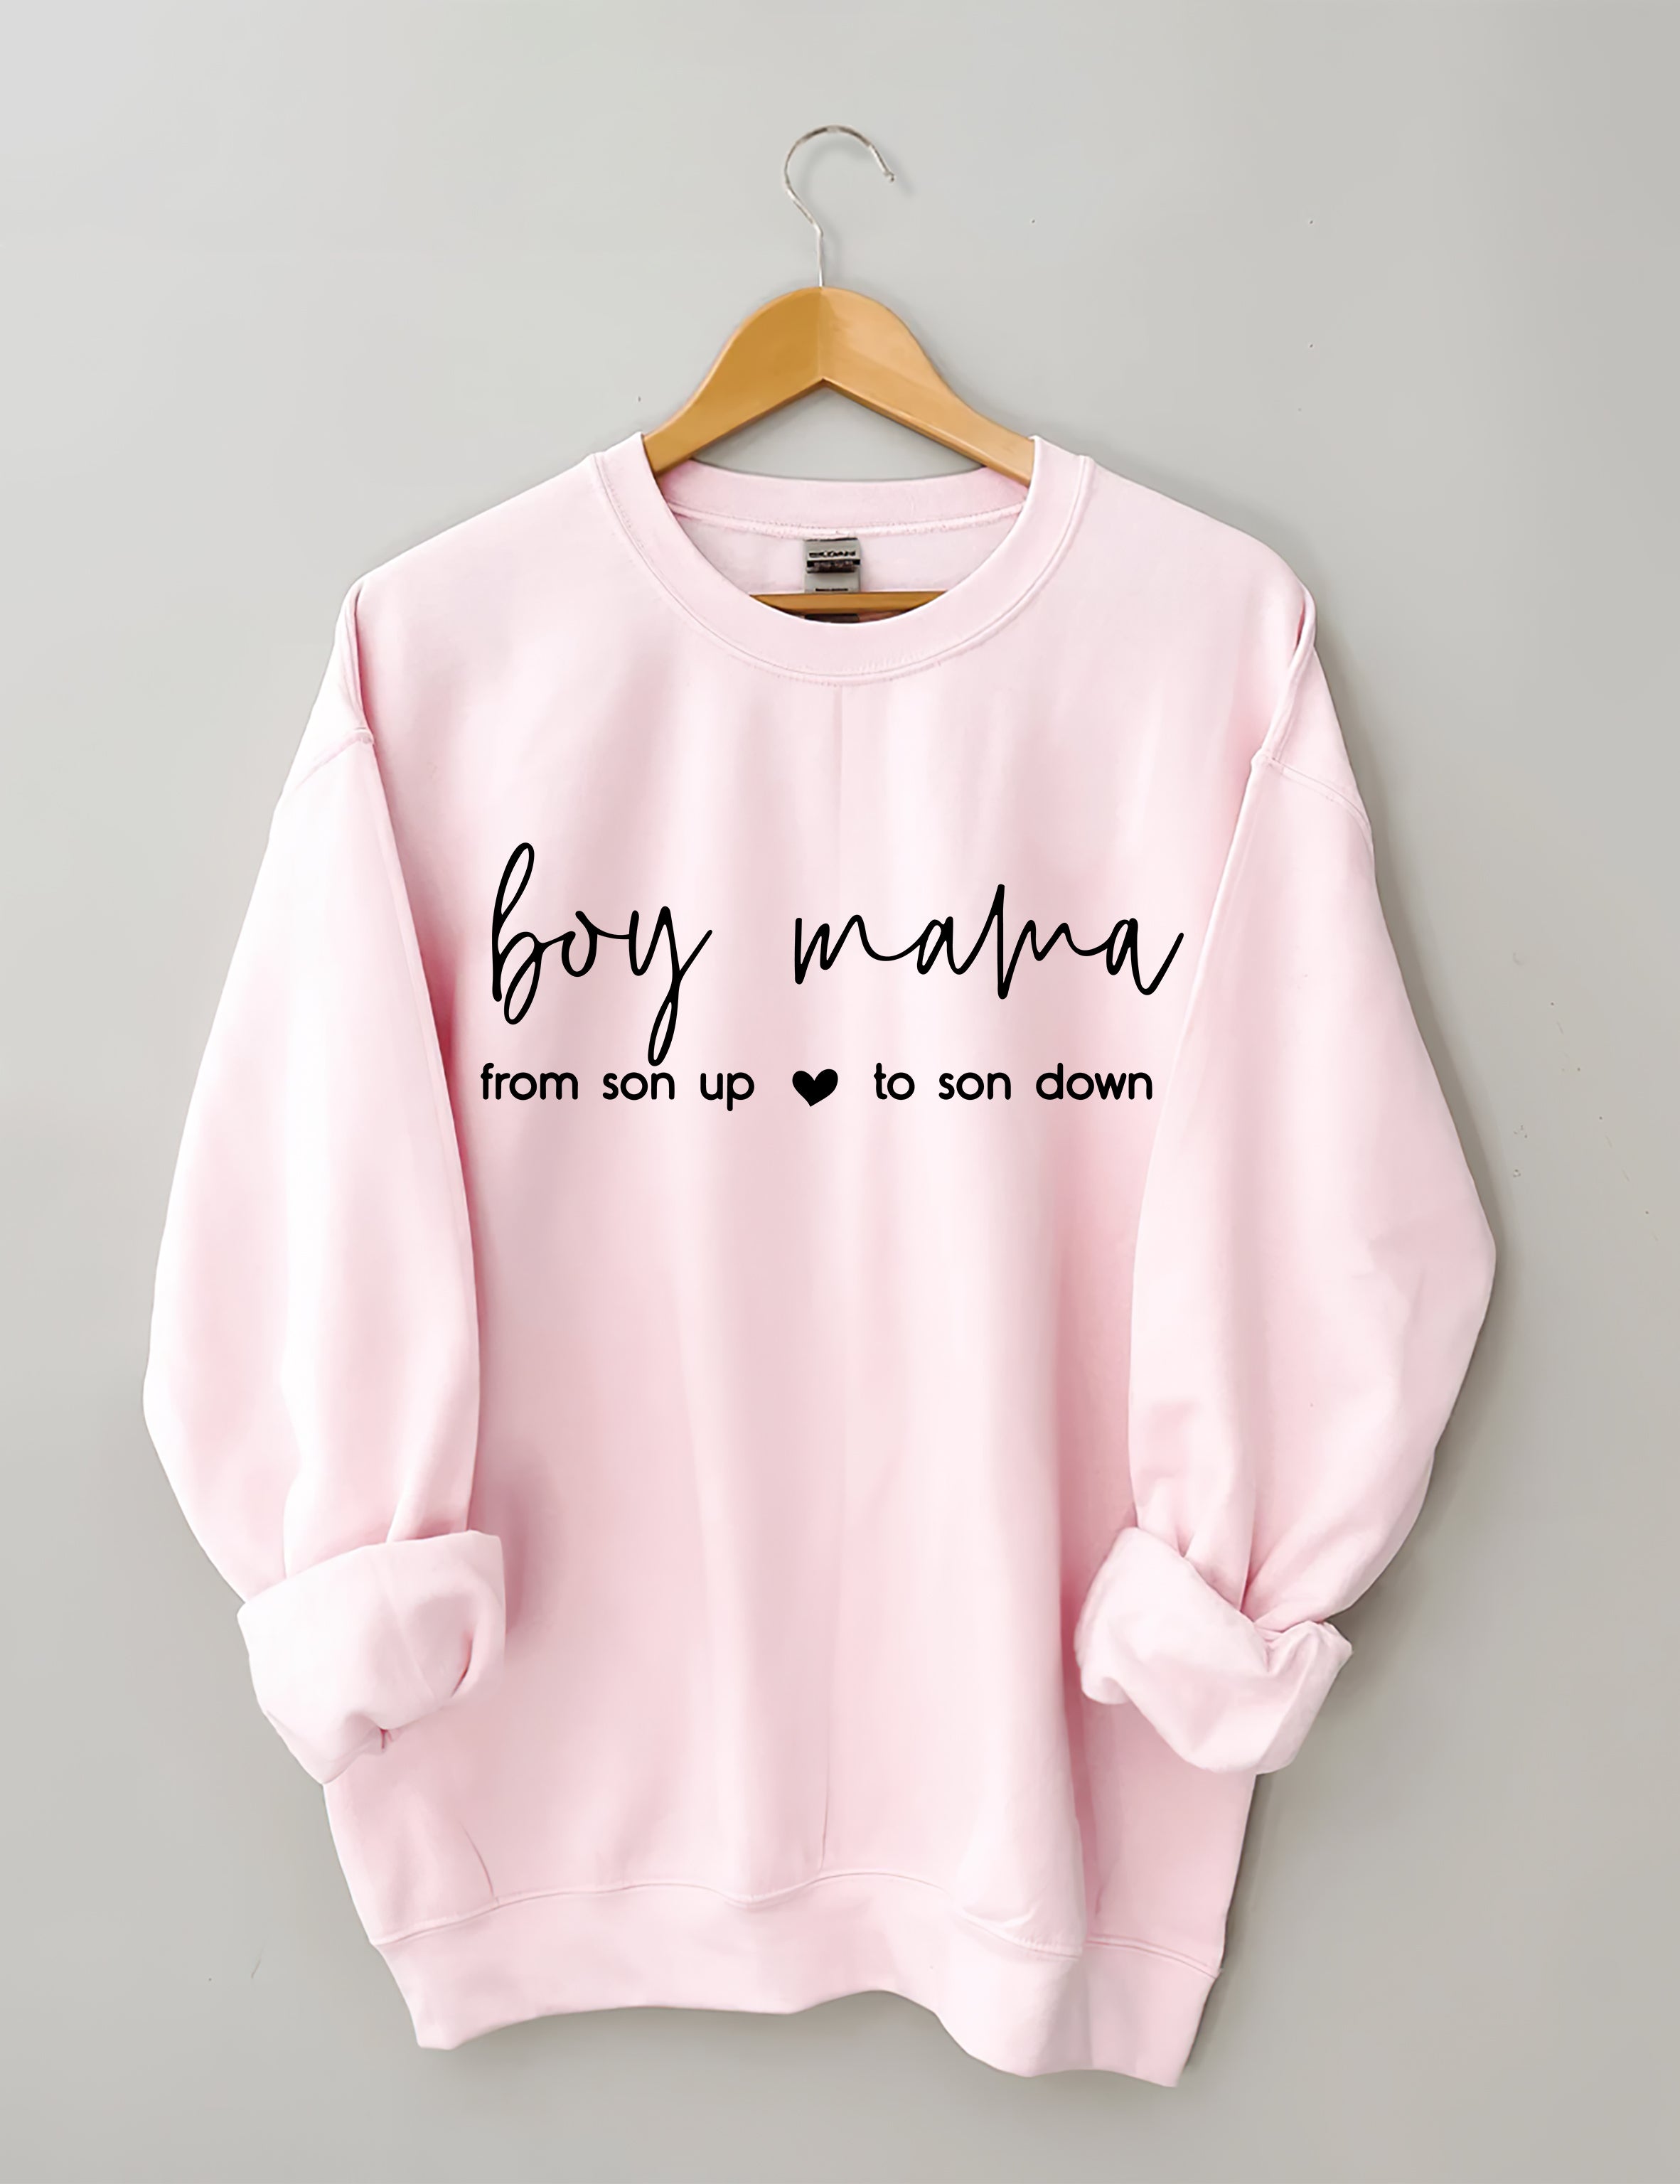 Boy Mama From Son Up to Son Down Sweatshirt